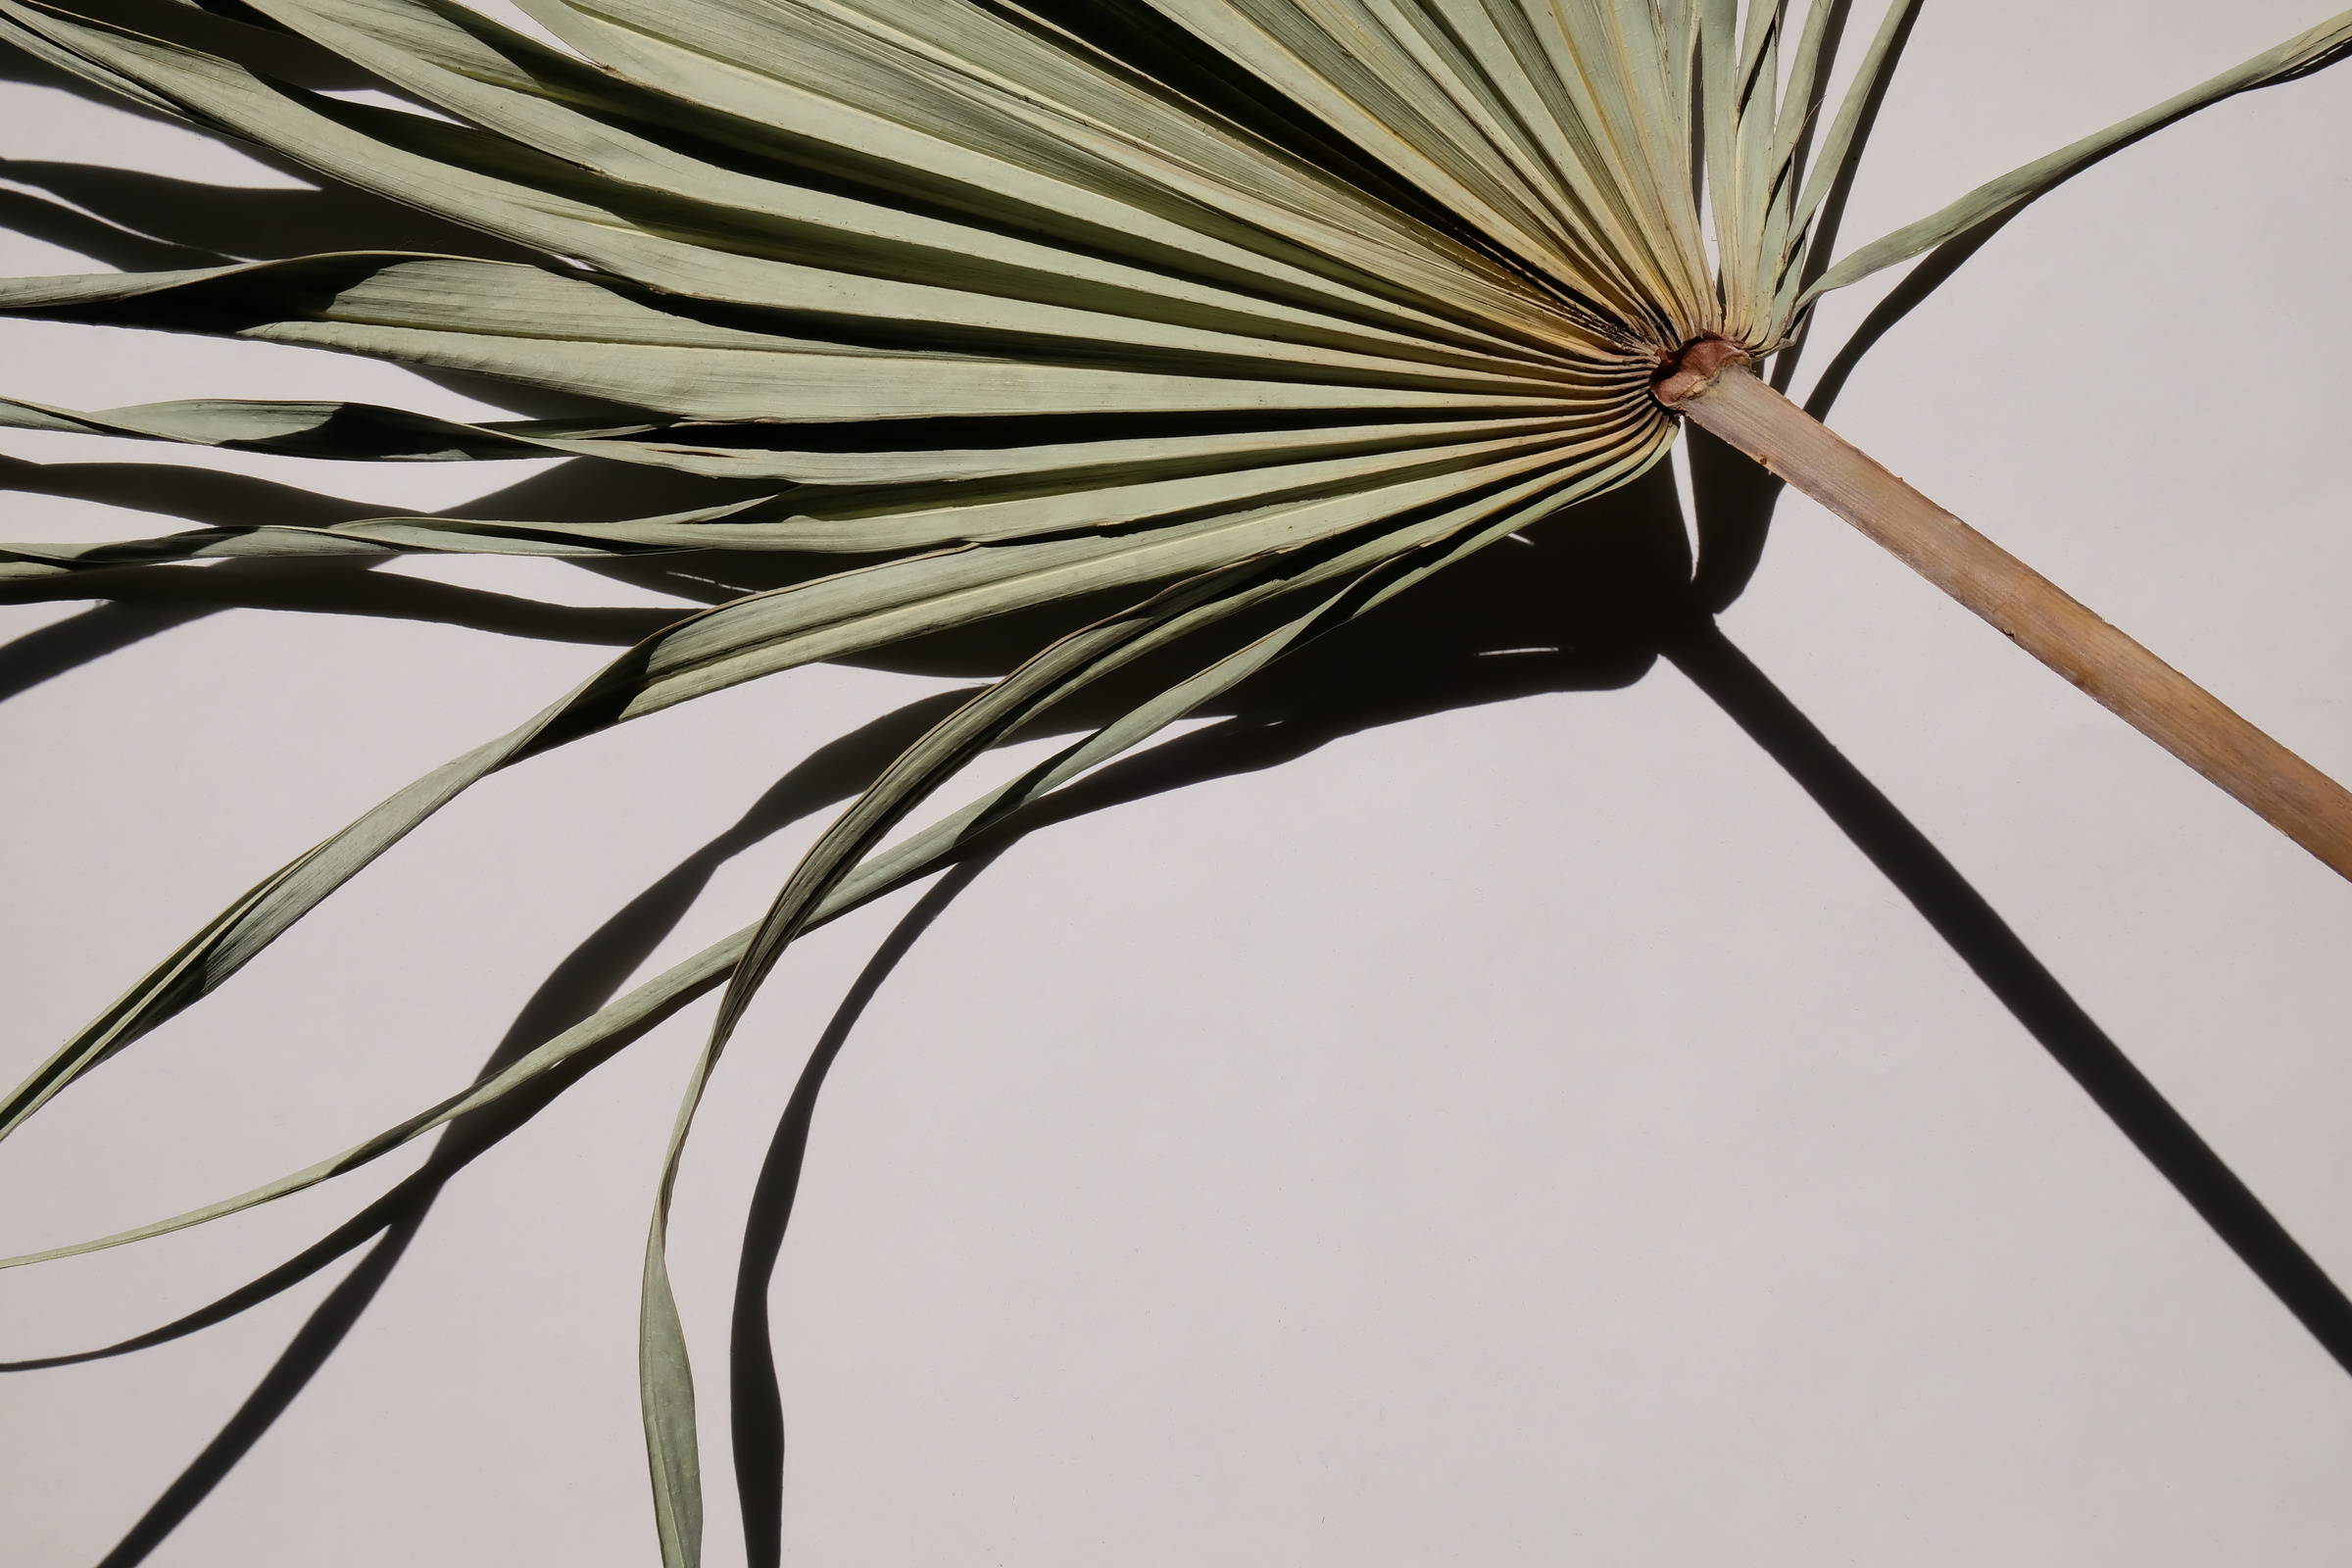 Dried Palm Leaf on White Surface